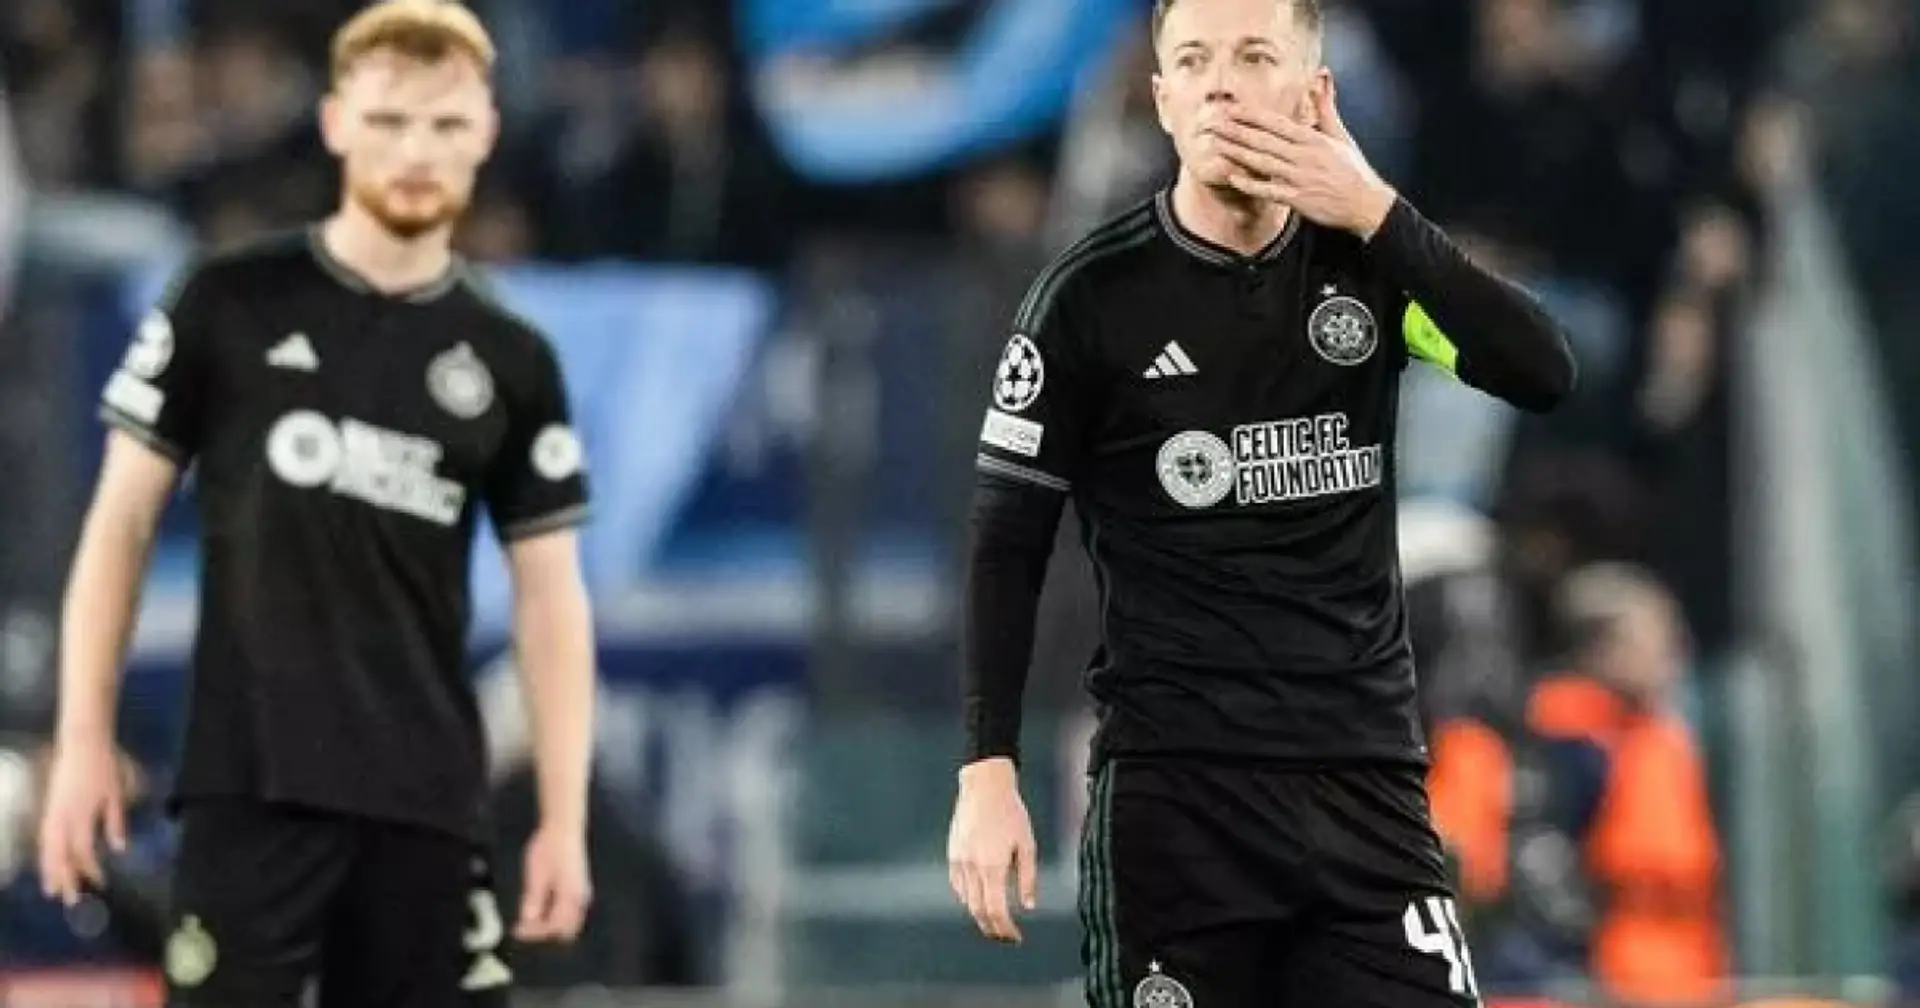 Celtic finish bottom of Champions League group for fourth time in last 5 attempts